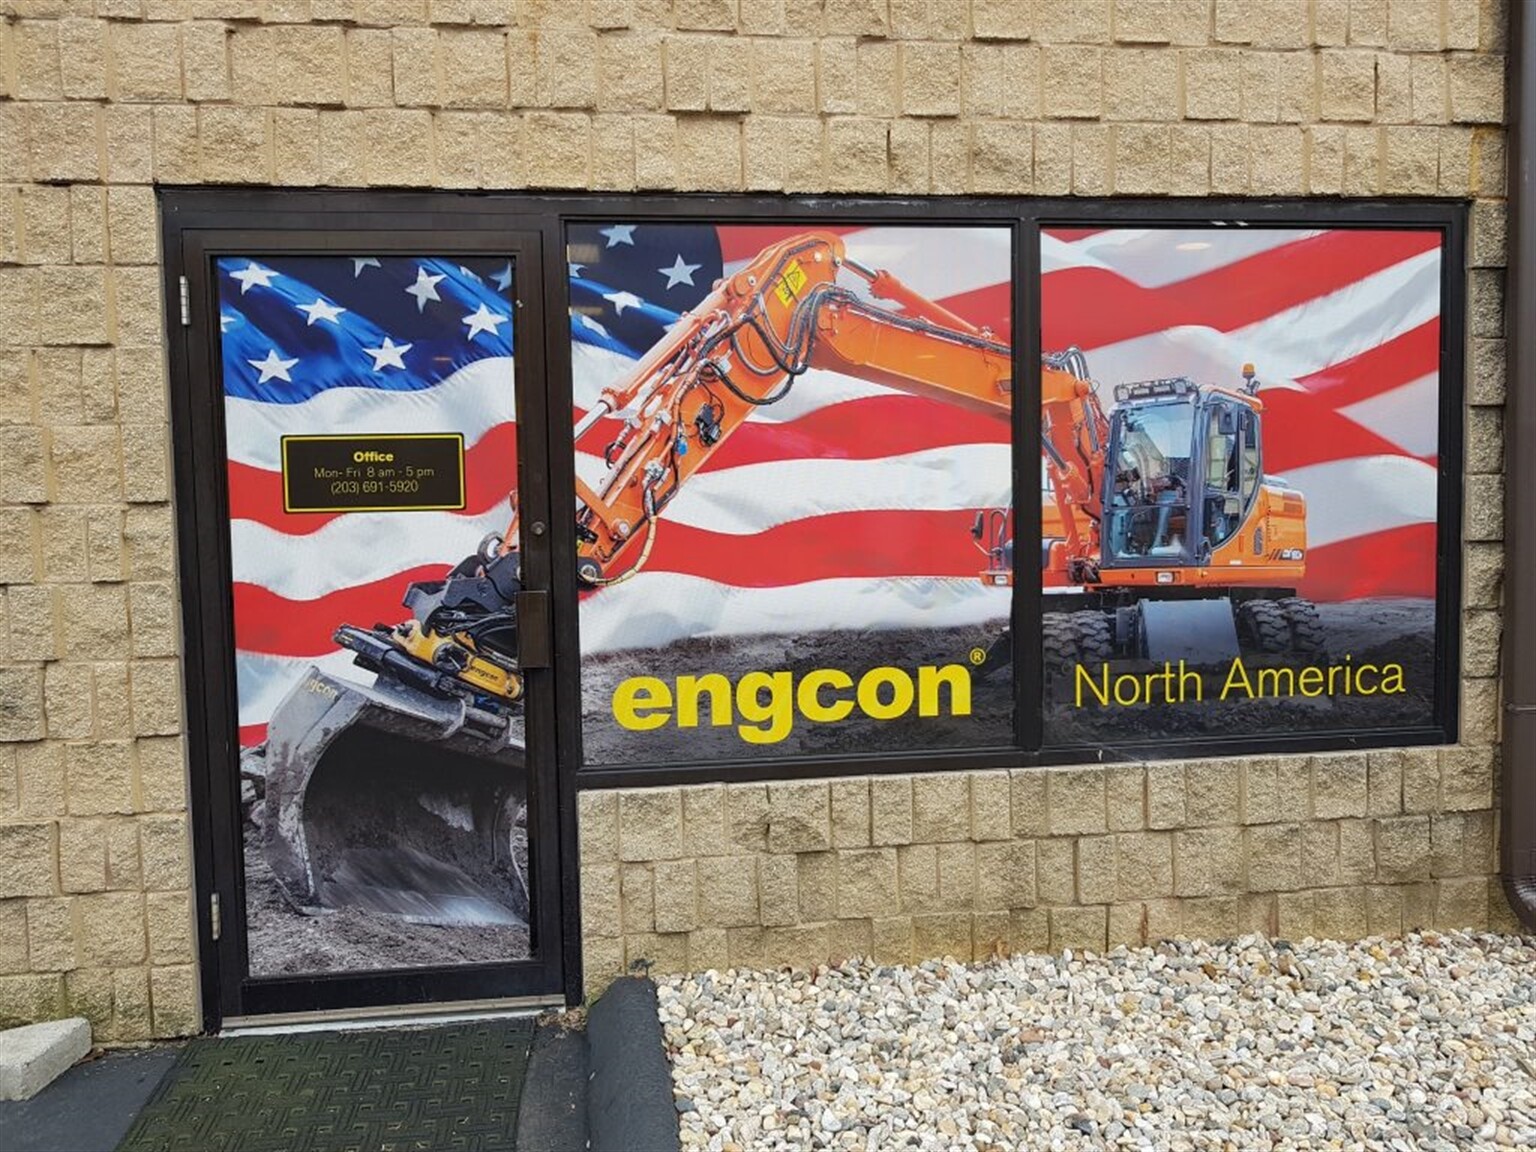 Engcon opens new office in North America